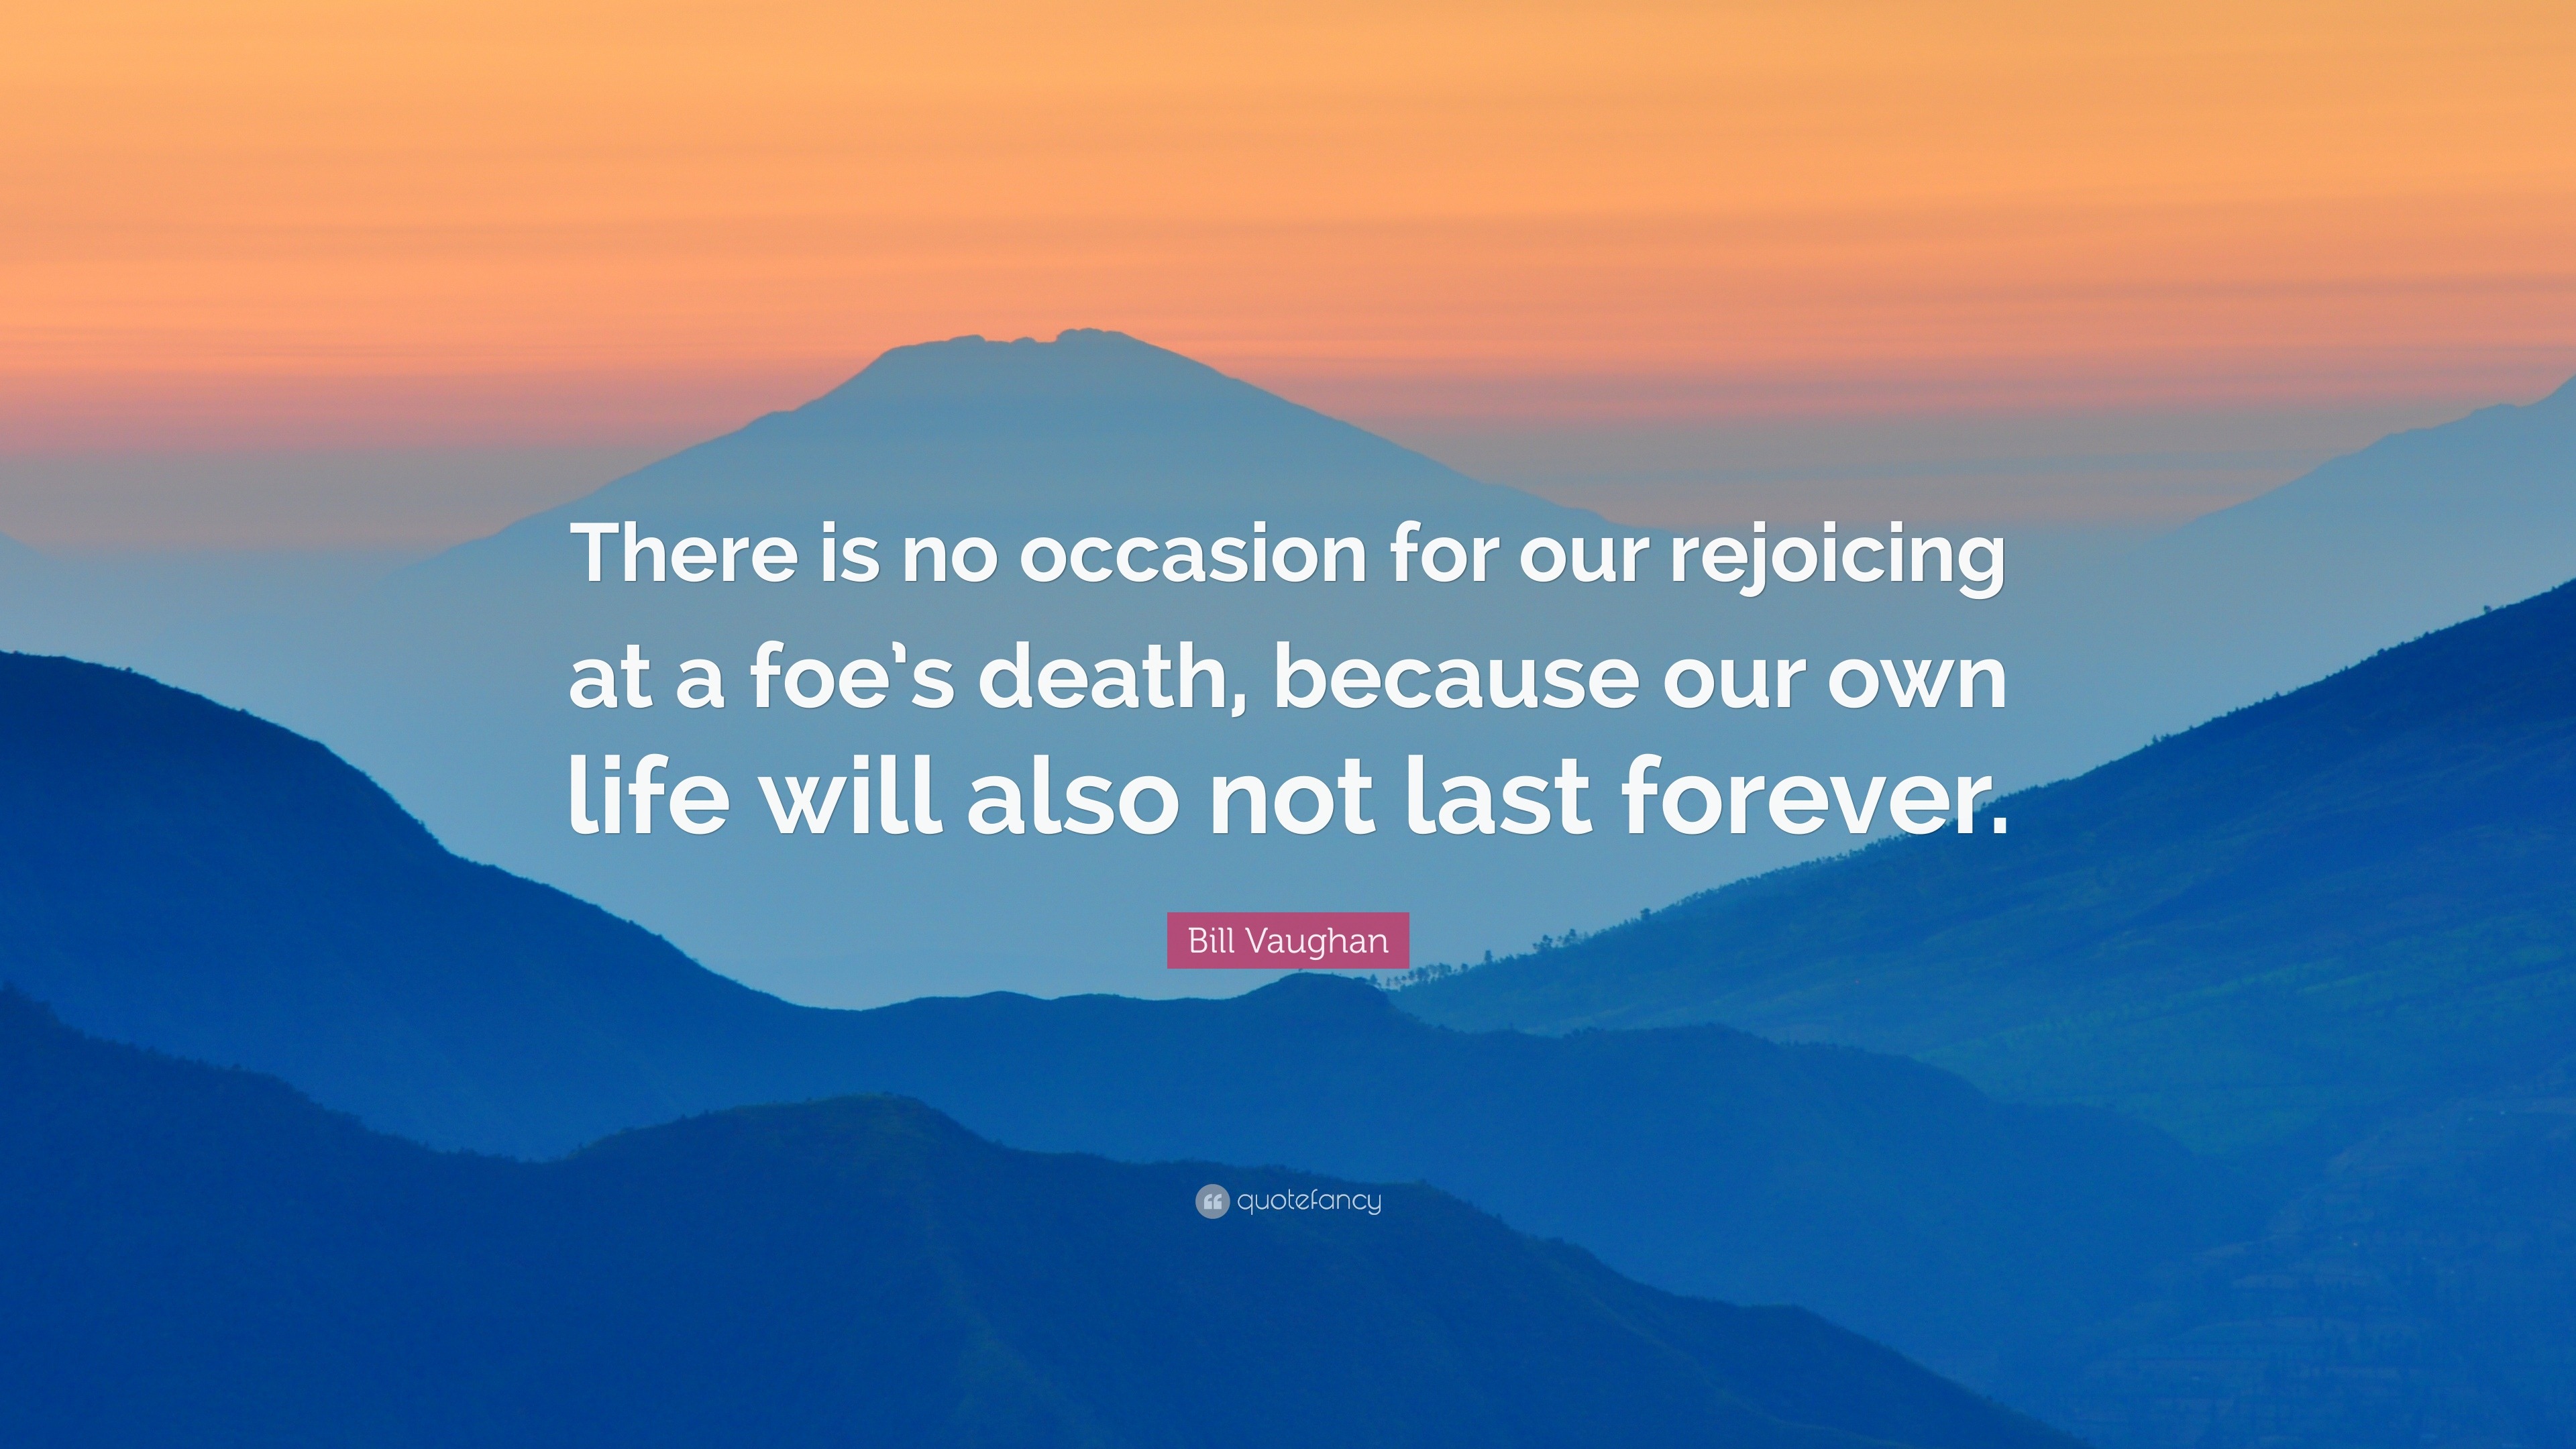 Bill Vaughan Quote: “There is no occasion for our rejoicing at a foe’s ...